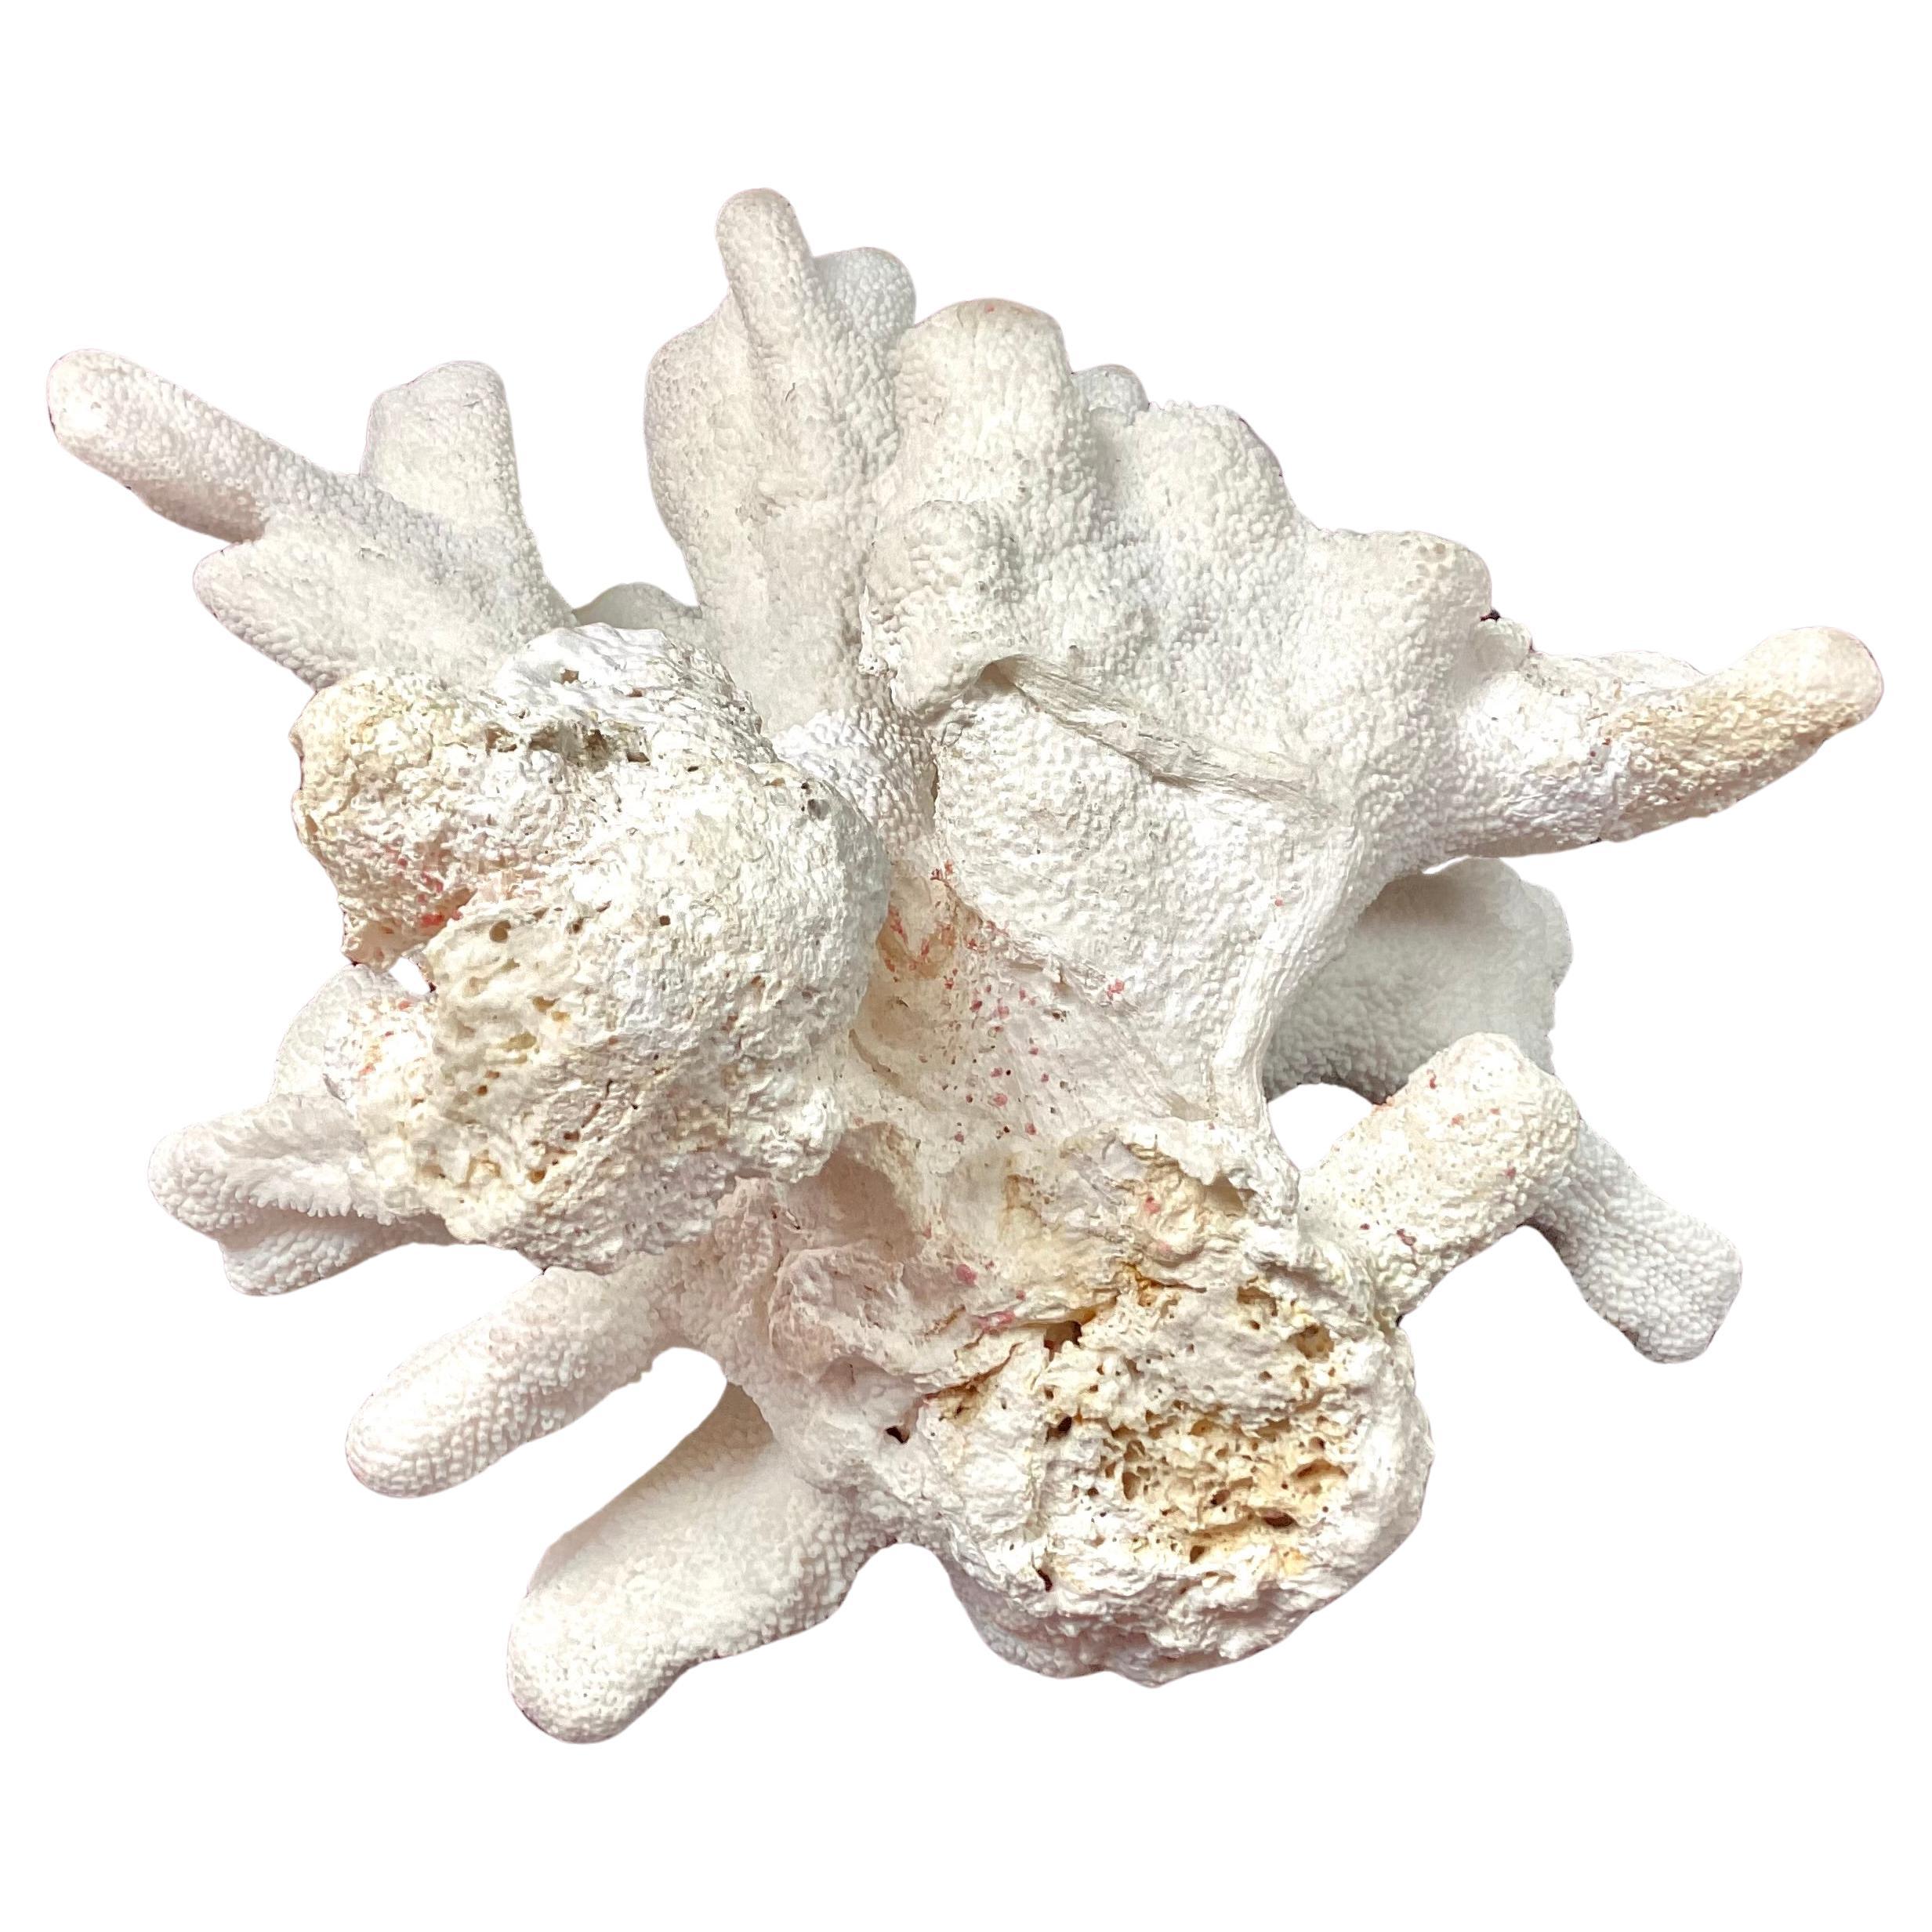 A rare natural white sea coral specimen. Color is a natural white. Flat underside for easy display. This specimen is a great size for displaying in any decor.